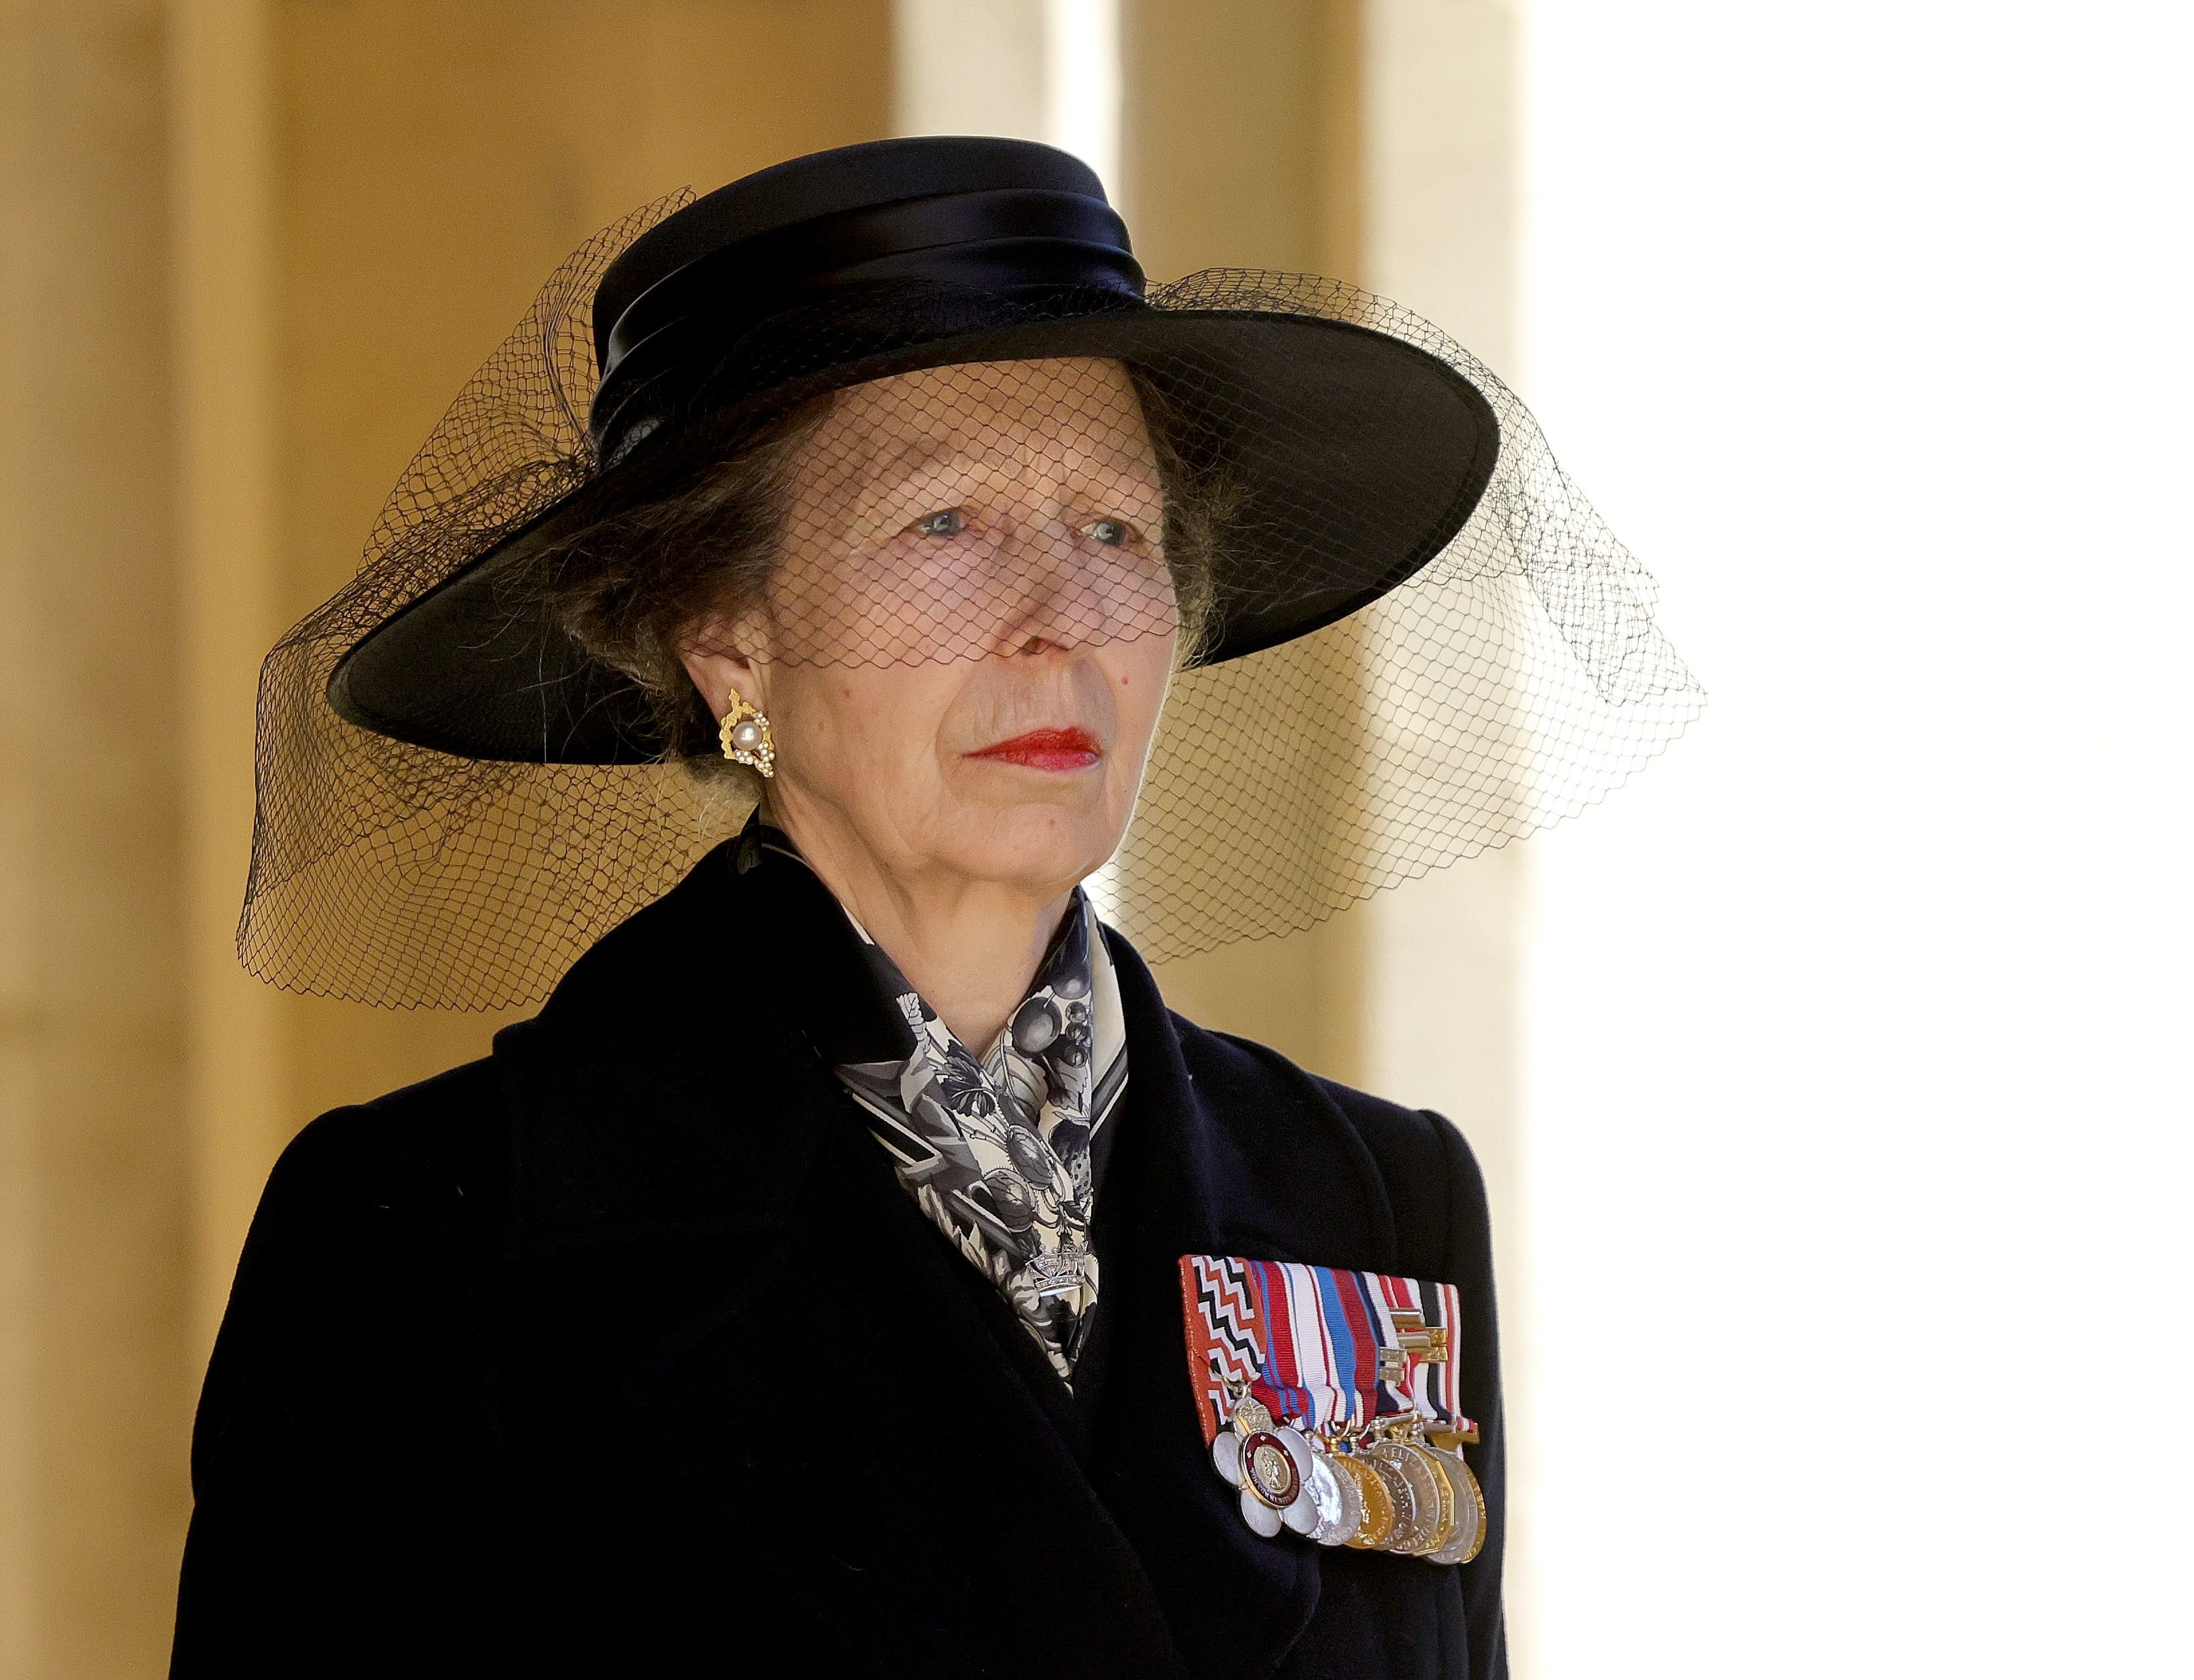 Princess Anne at the Ceremonial Procession during the funeral of Prince Philip at Windsor Castle on April 17, 2021 | Photo: Getty Images